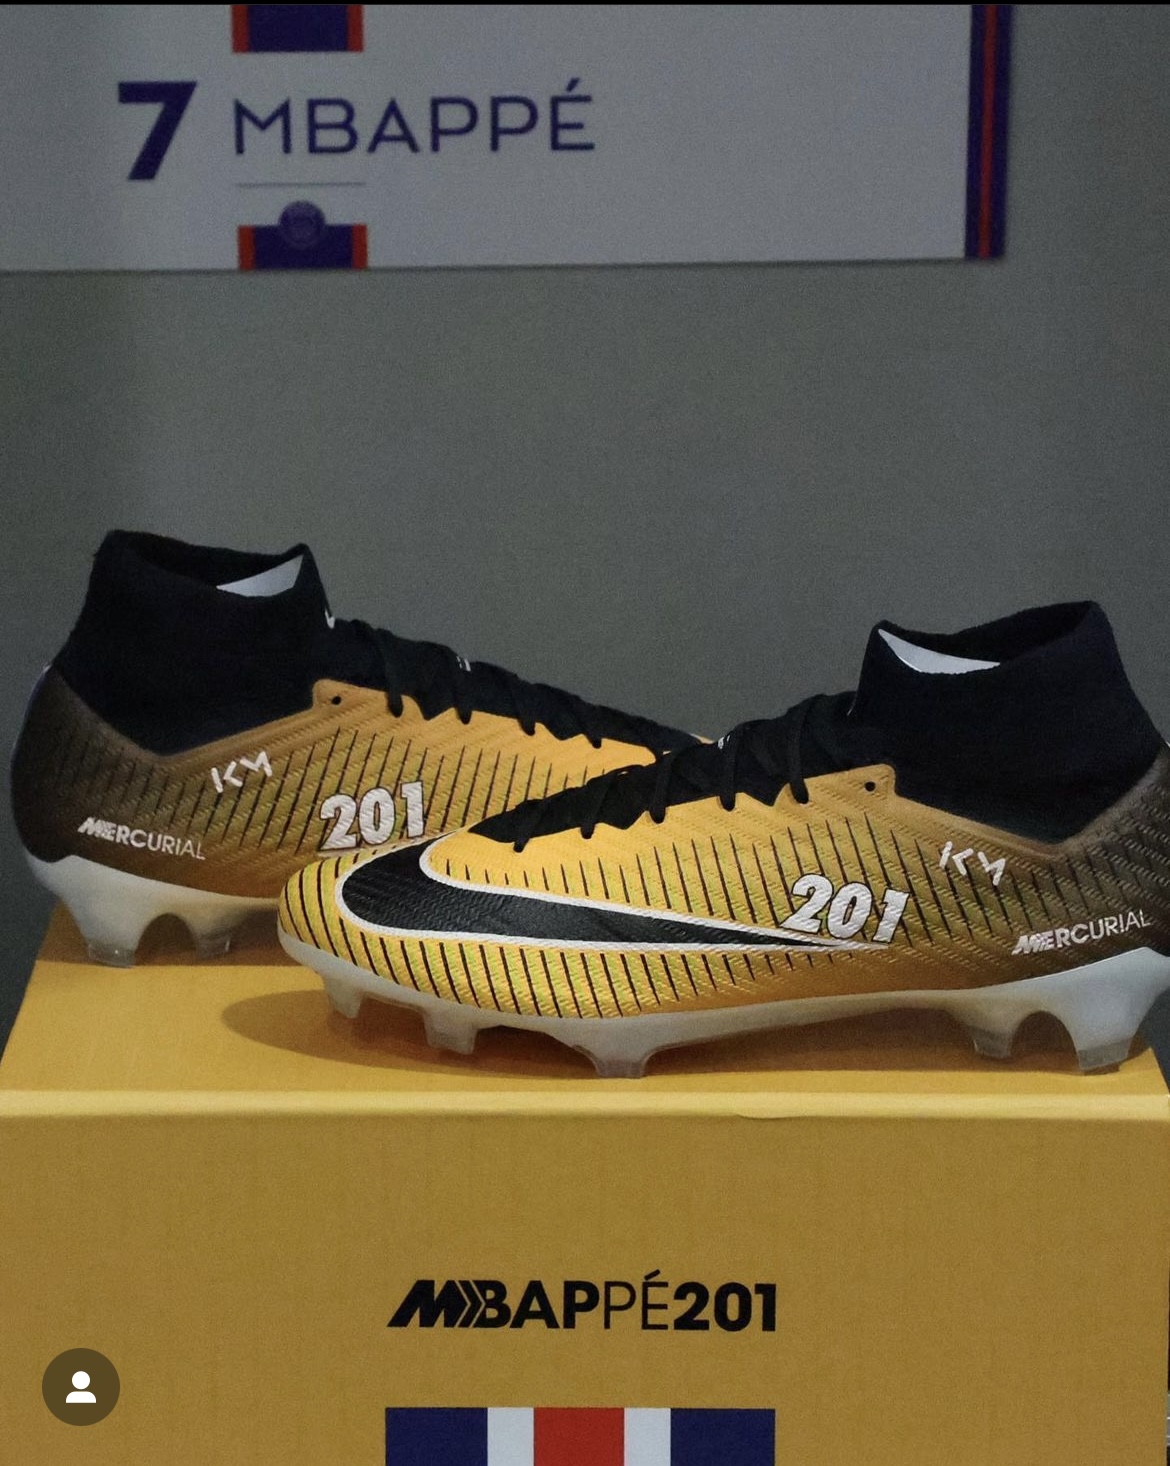 Nike Sends Kylian Mbappe Boots to Celebrate Becoming PSG's